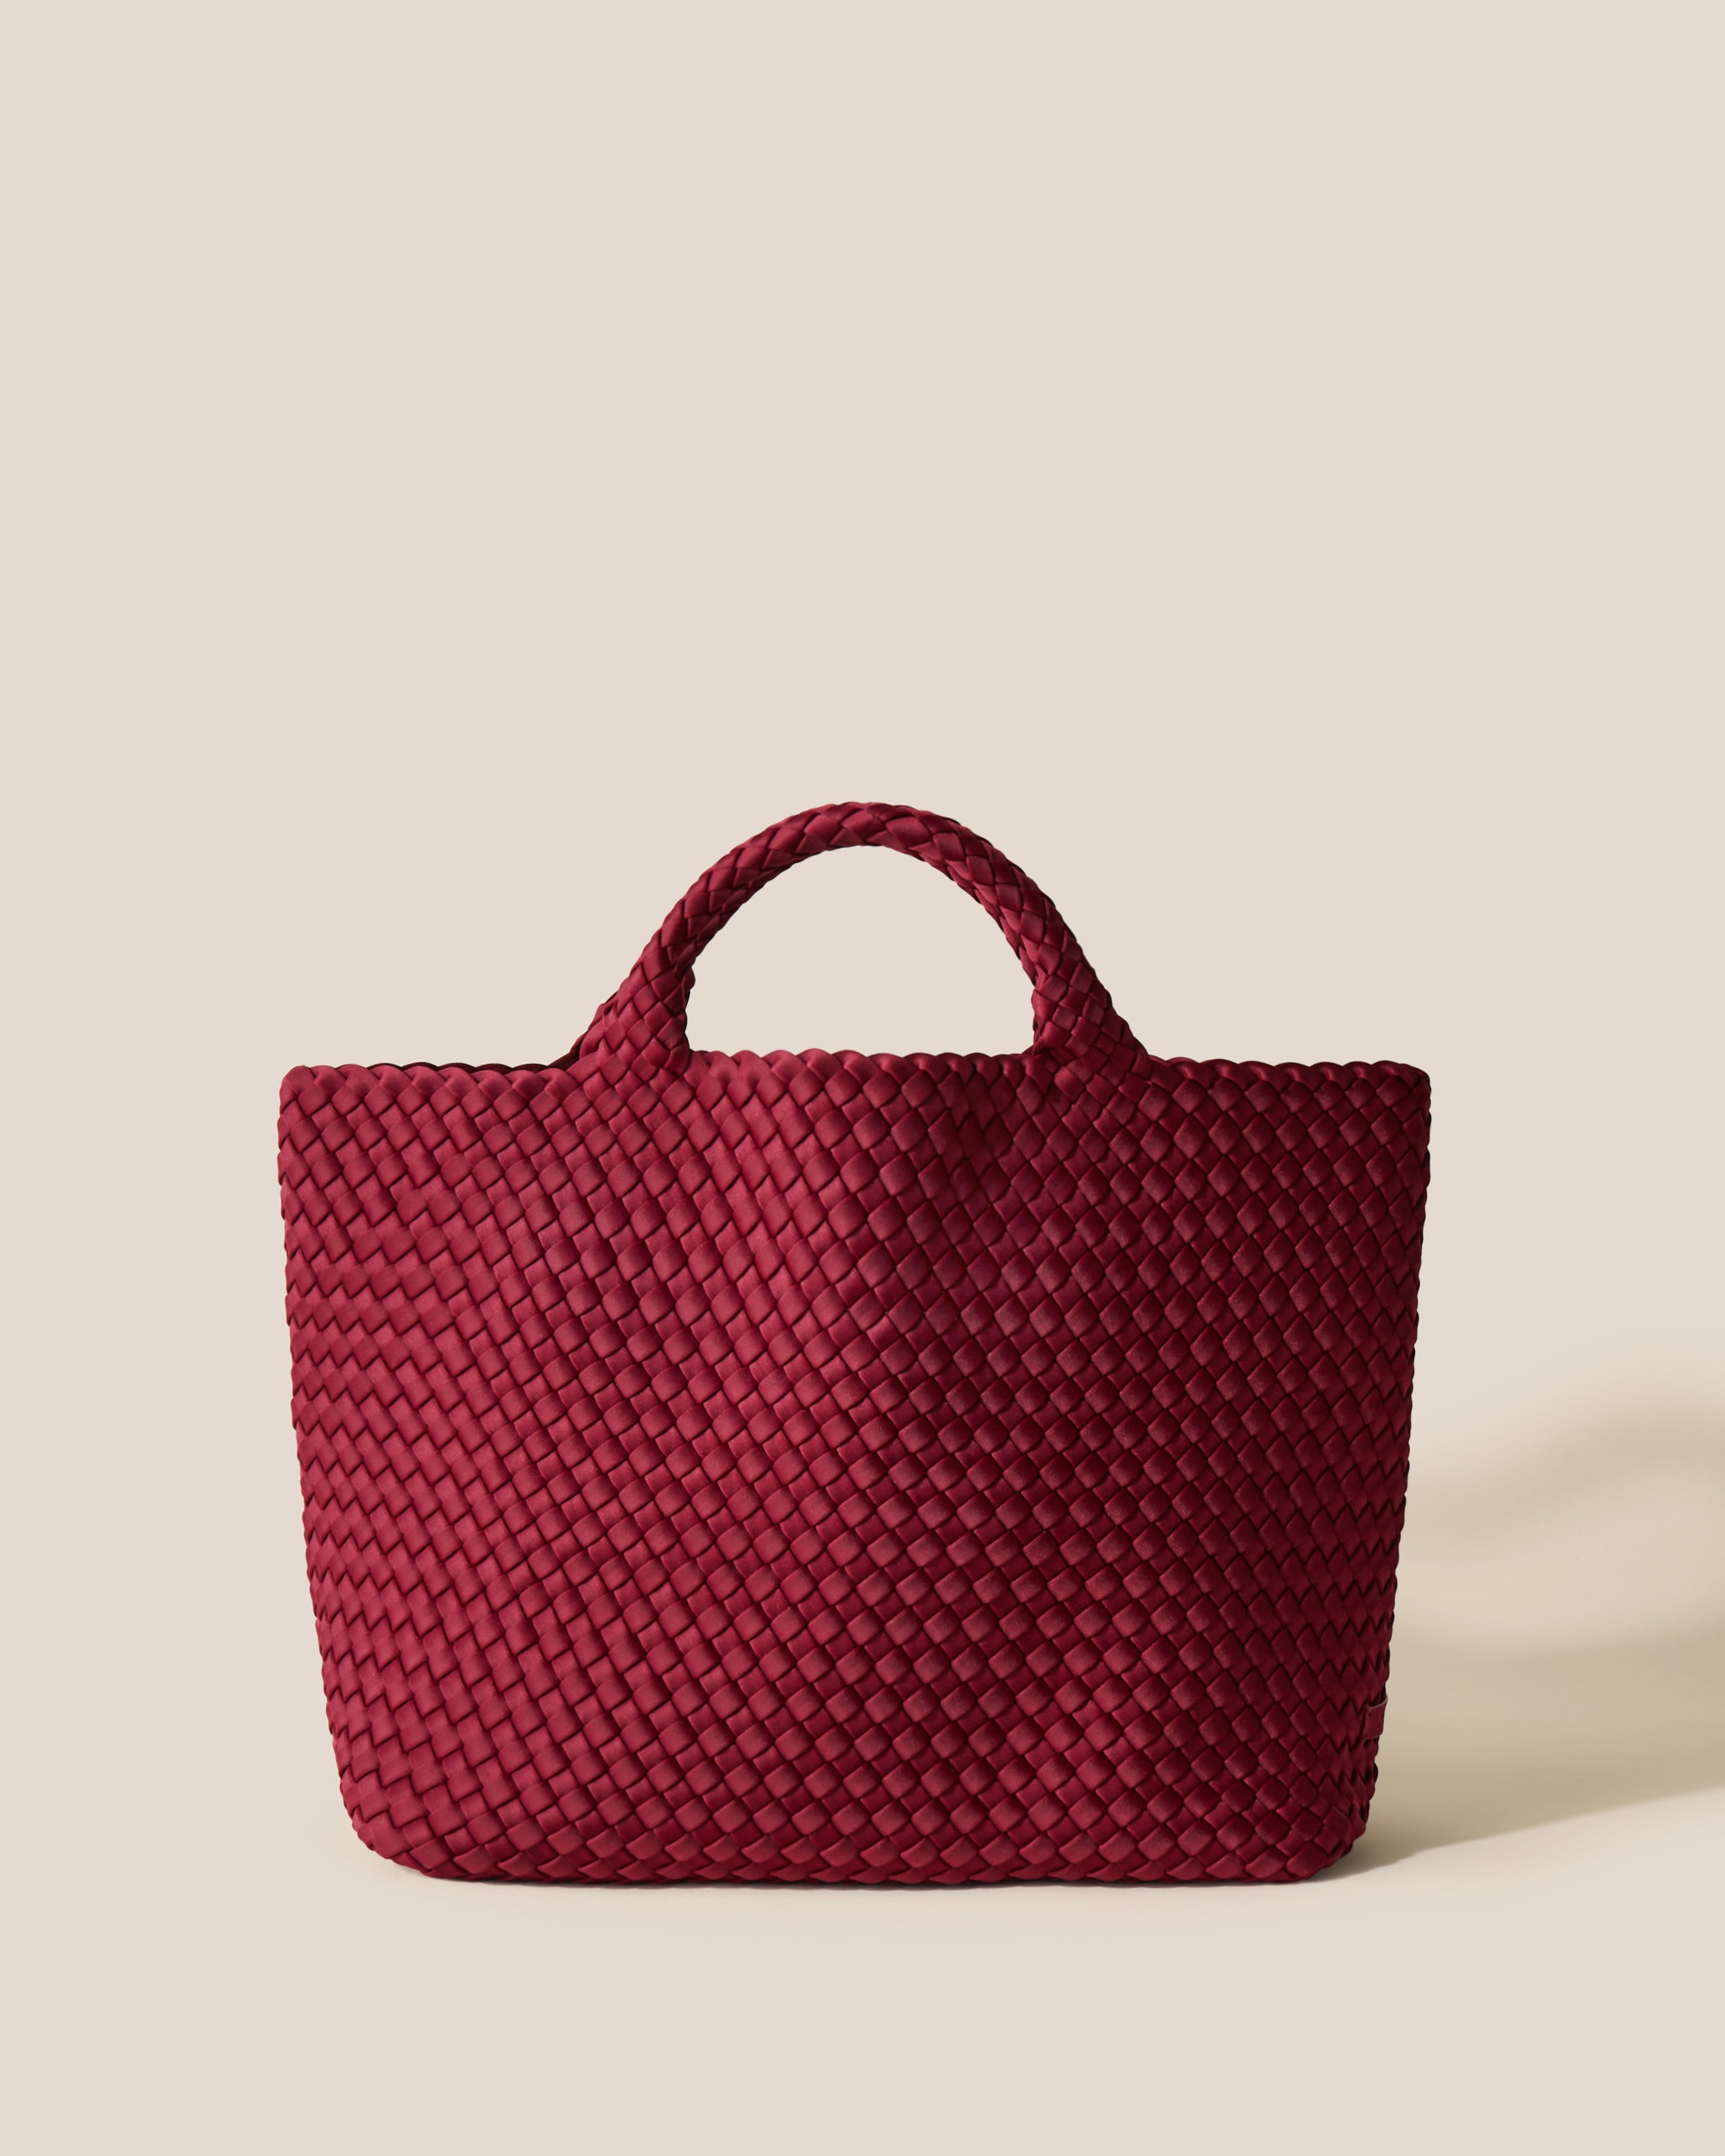 VeeCollective Small Porter Tote Bag in Pink